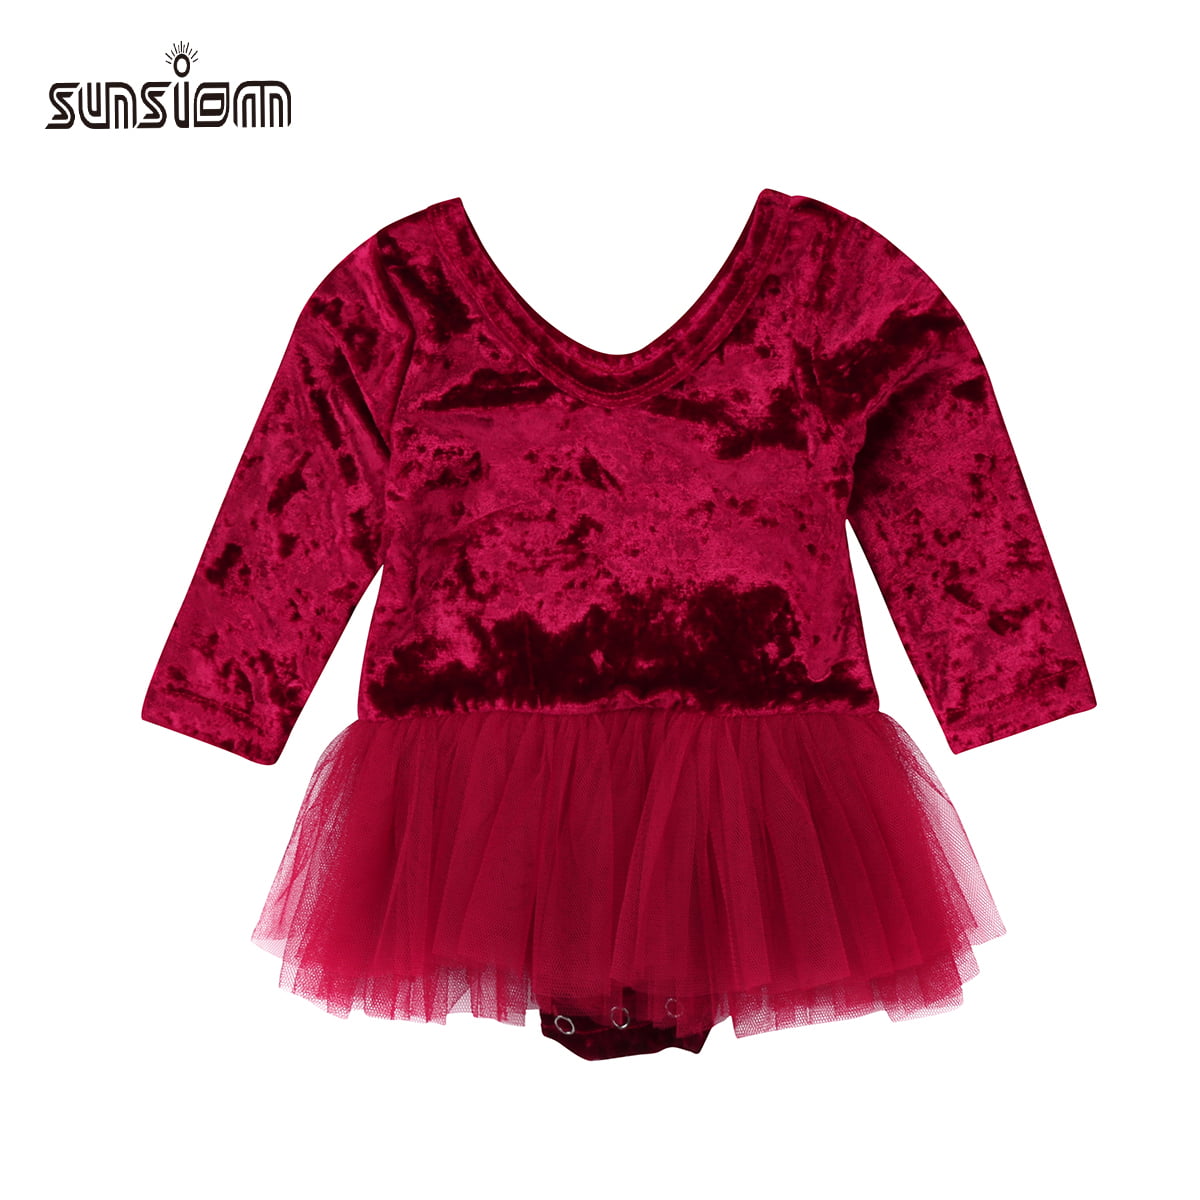 Toddler Baby Girls Long Sleeve Tulle Romper Bodysuit Jumpsuit Clothes Outfits